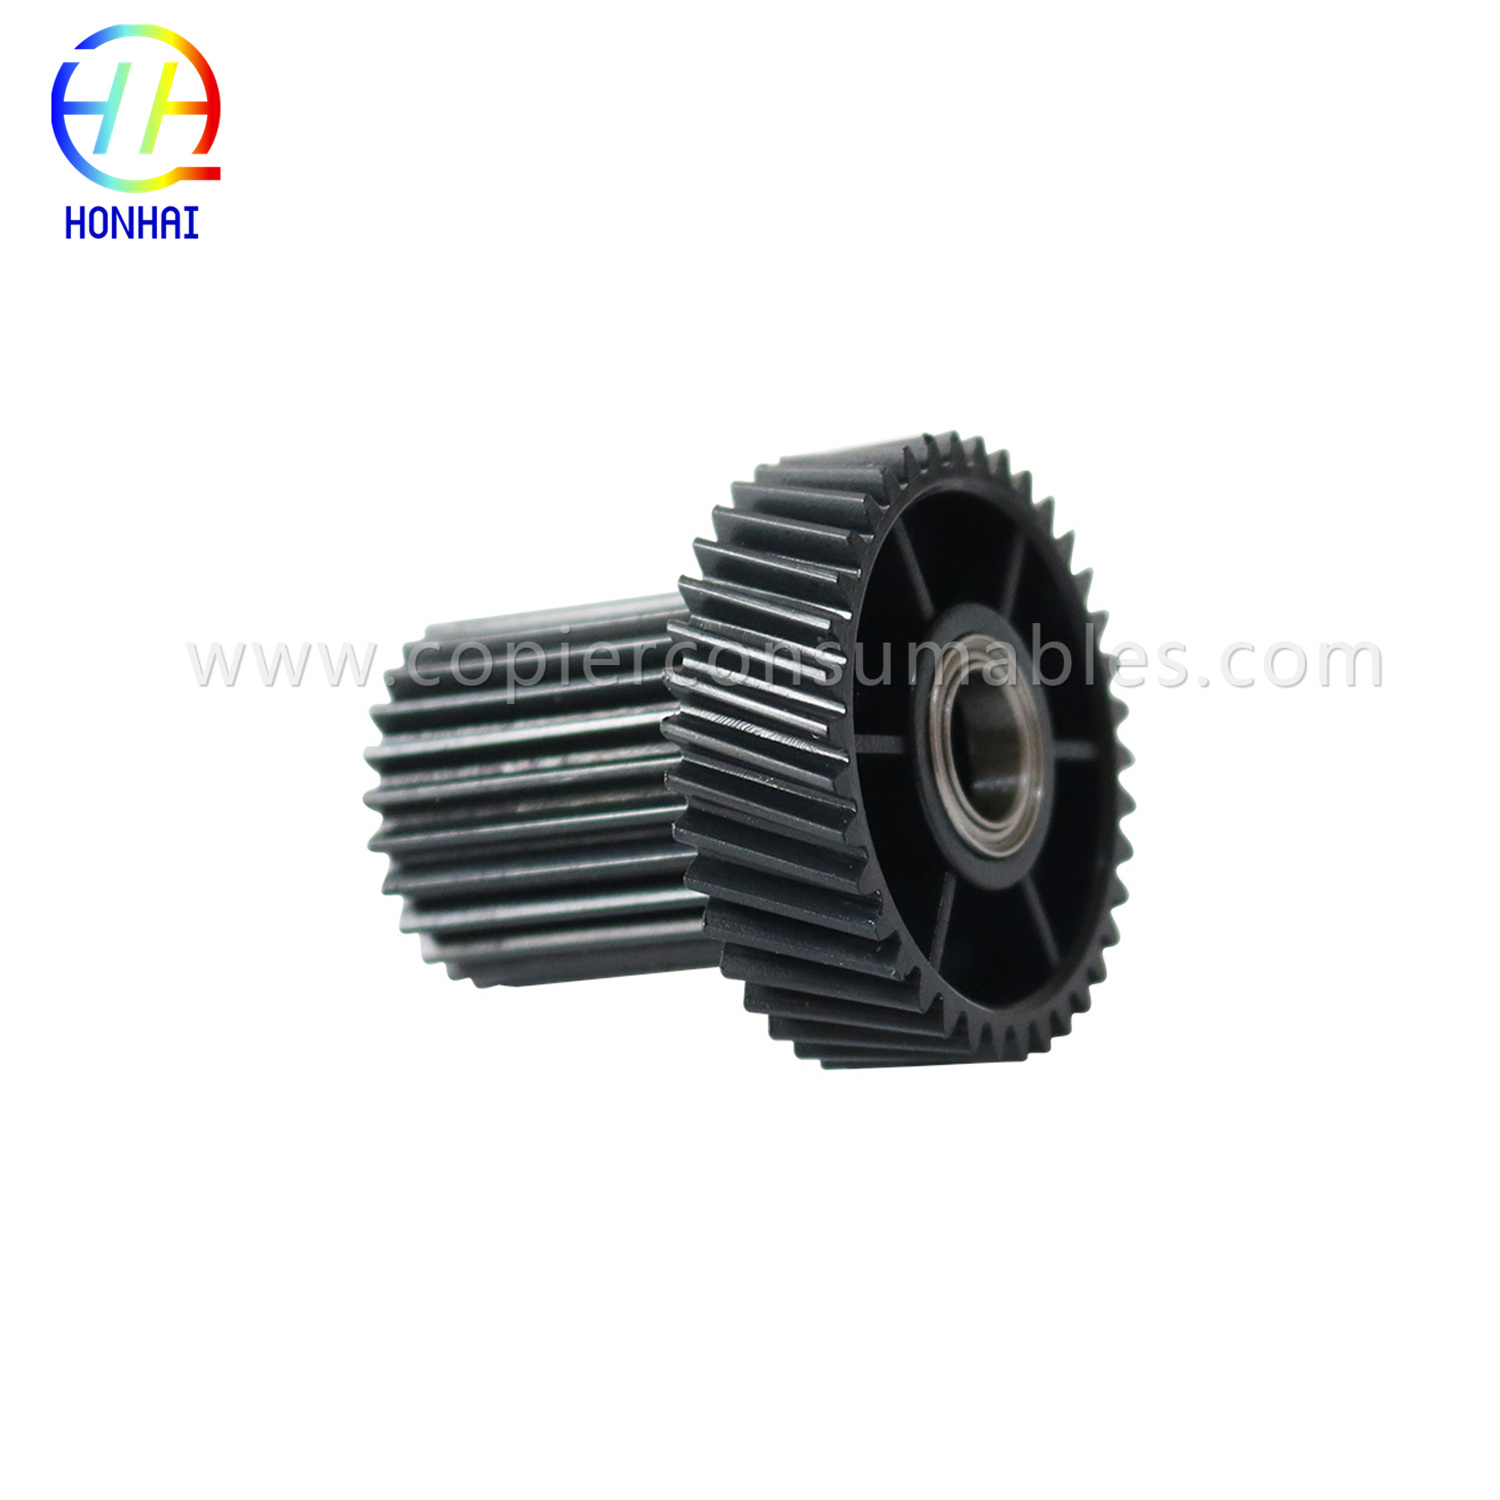 Registration Drive Gear for Xerox Docucolor 700 700I 770 Color C75 J75 (007K97880) (3)